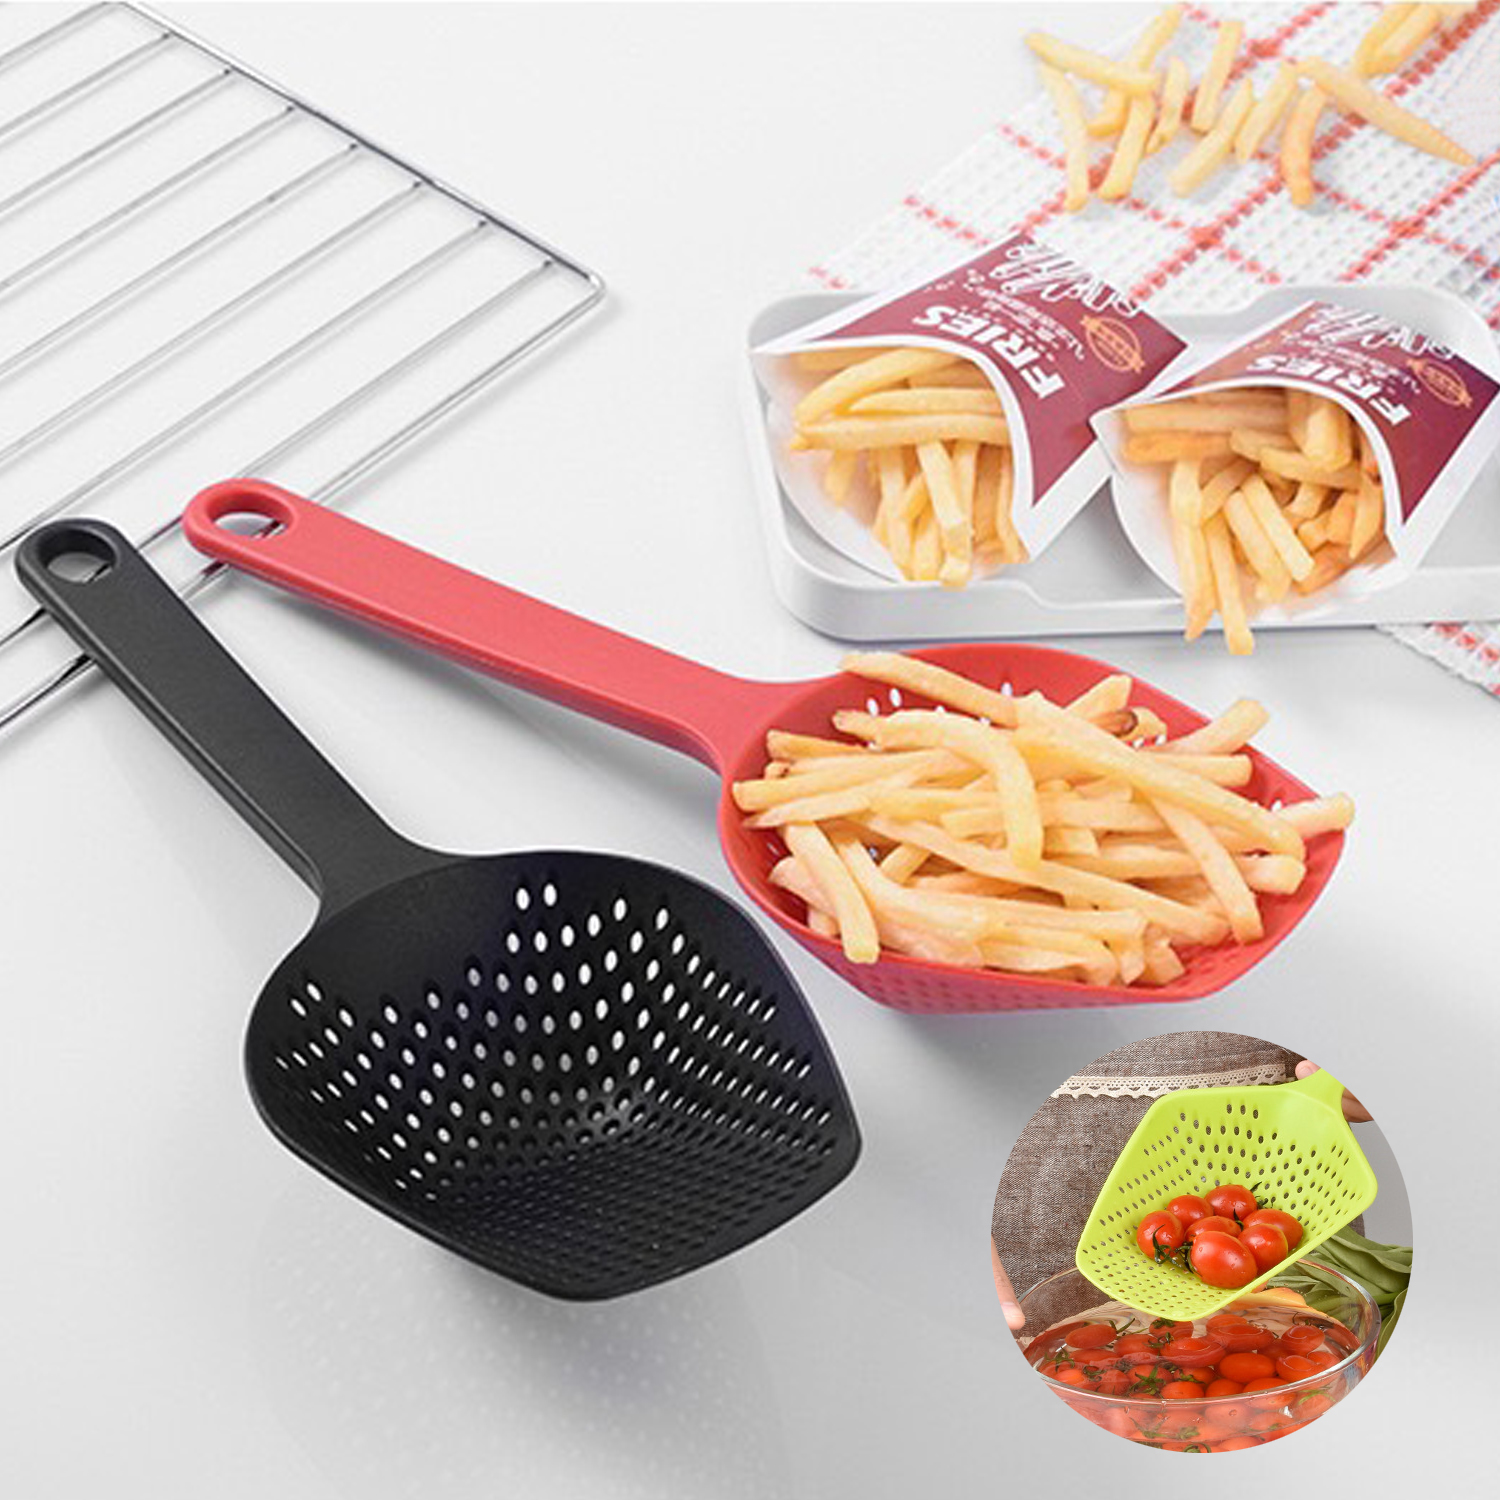 Portable Soup Spoon Strainer Nylon Kitchen Colourful Ladle Anti-scald Skimmer Fry Food Mesh Handy Filter Colanders Kitchen Tools